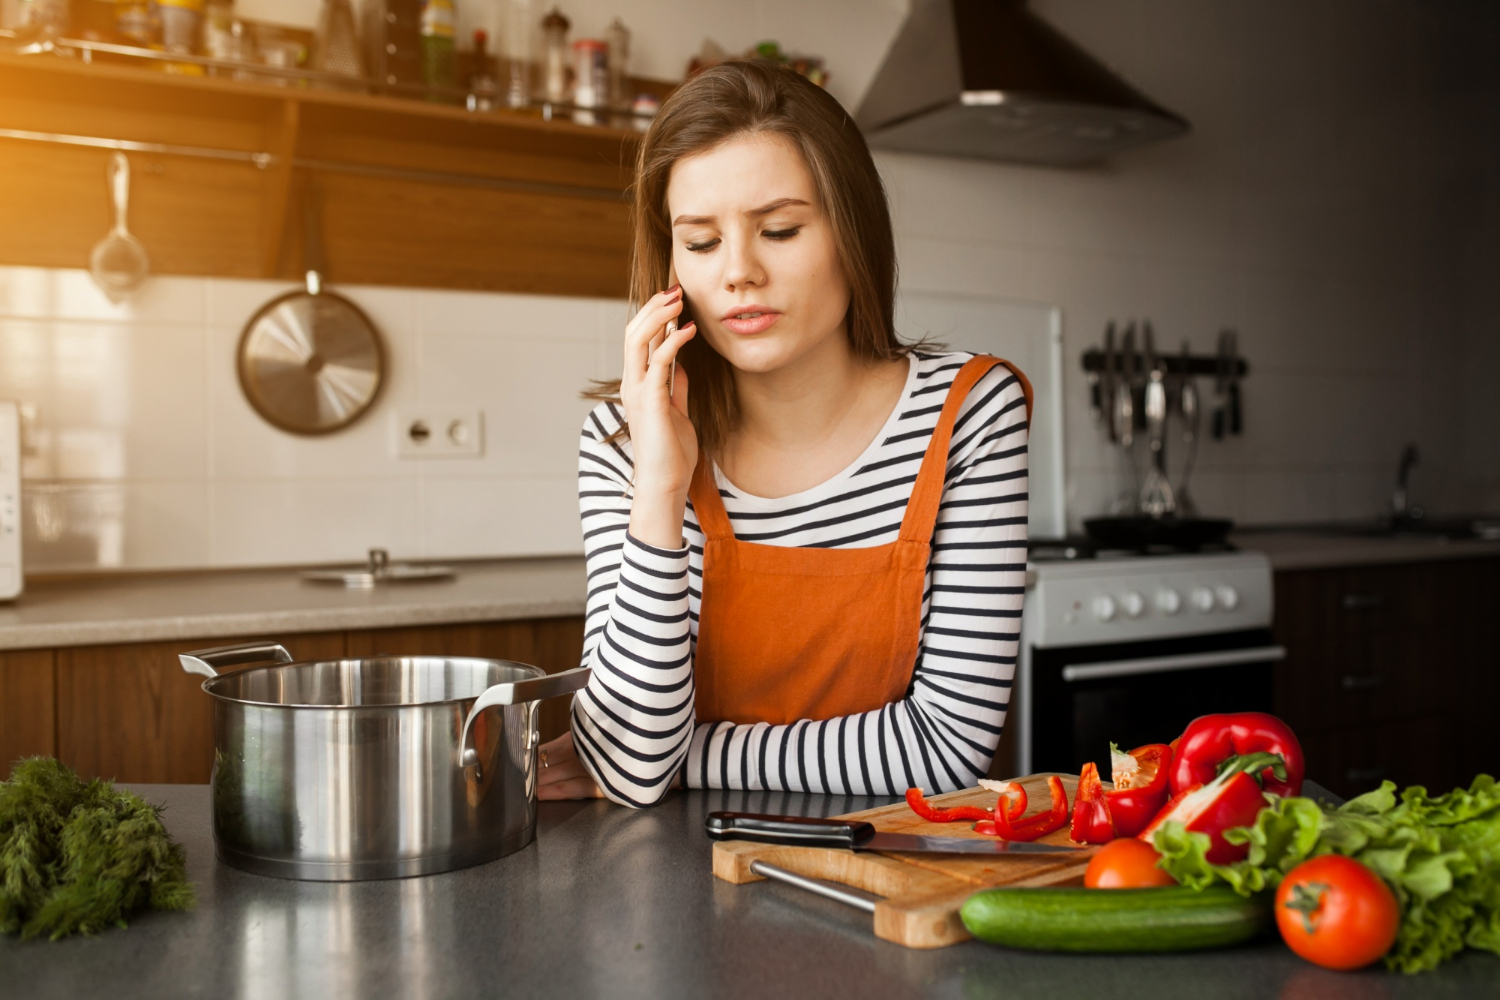 Is Meal Preparation Leaving You Disappointed?